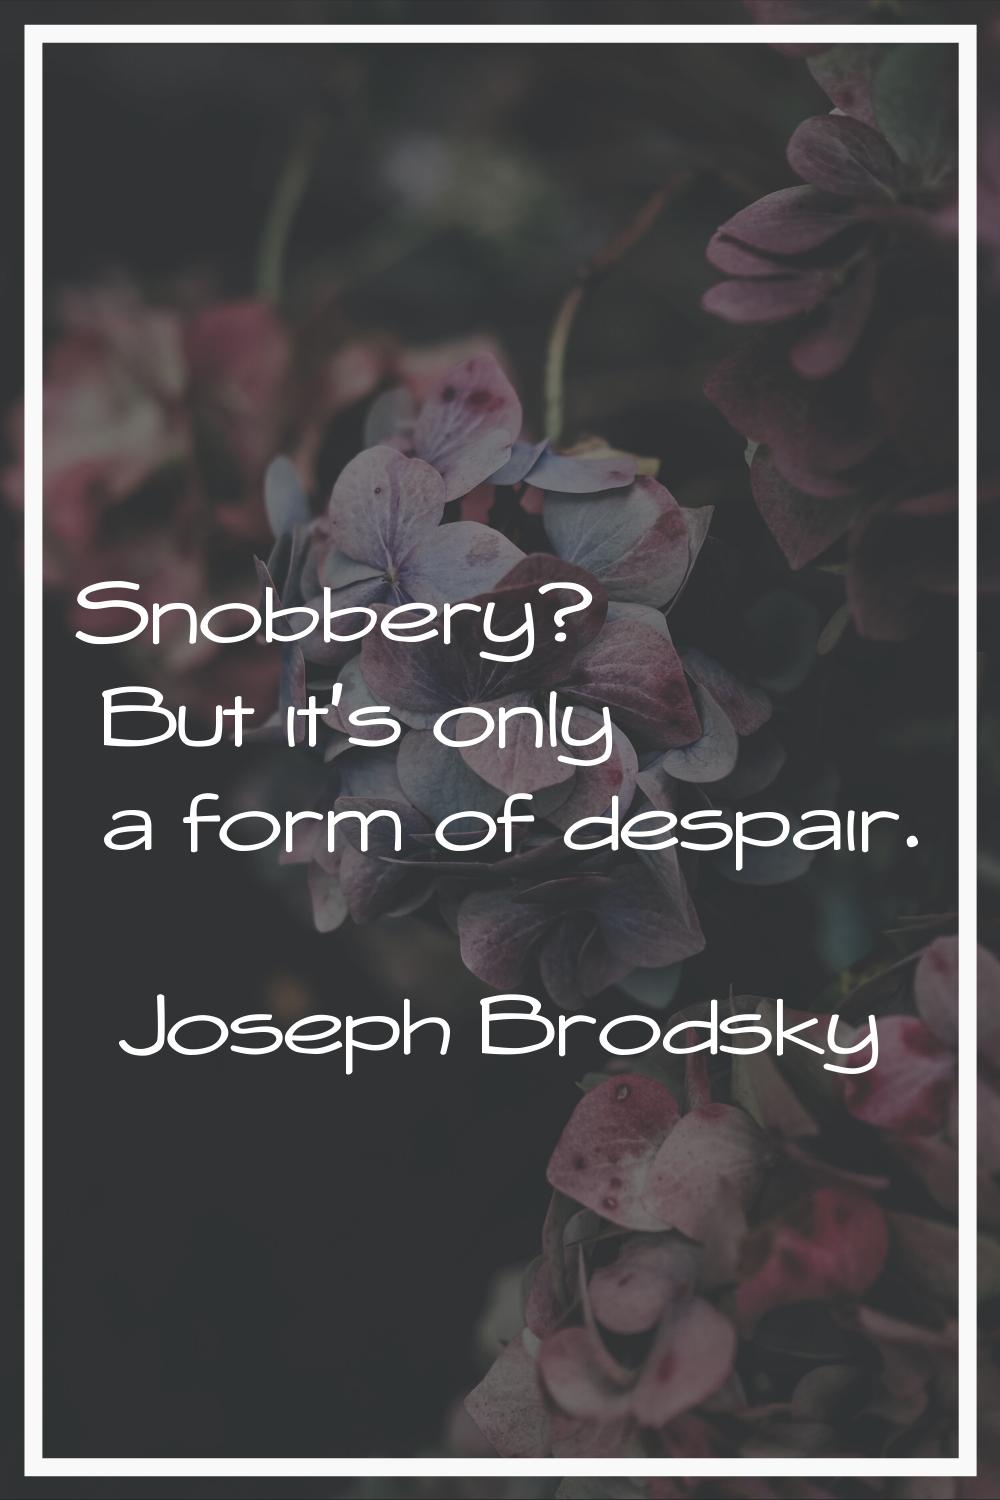 Snobbery? But it's only a form of despair.